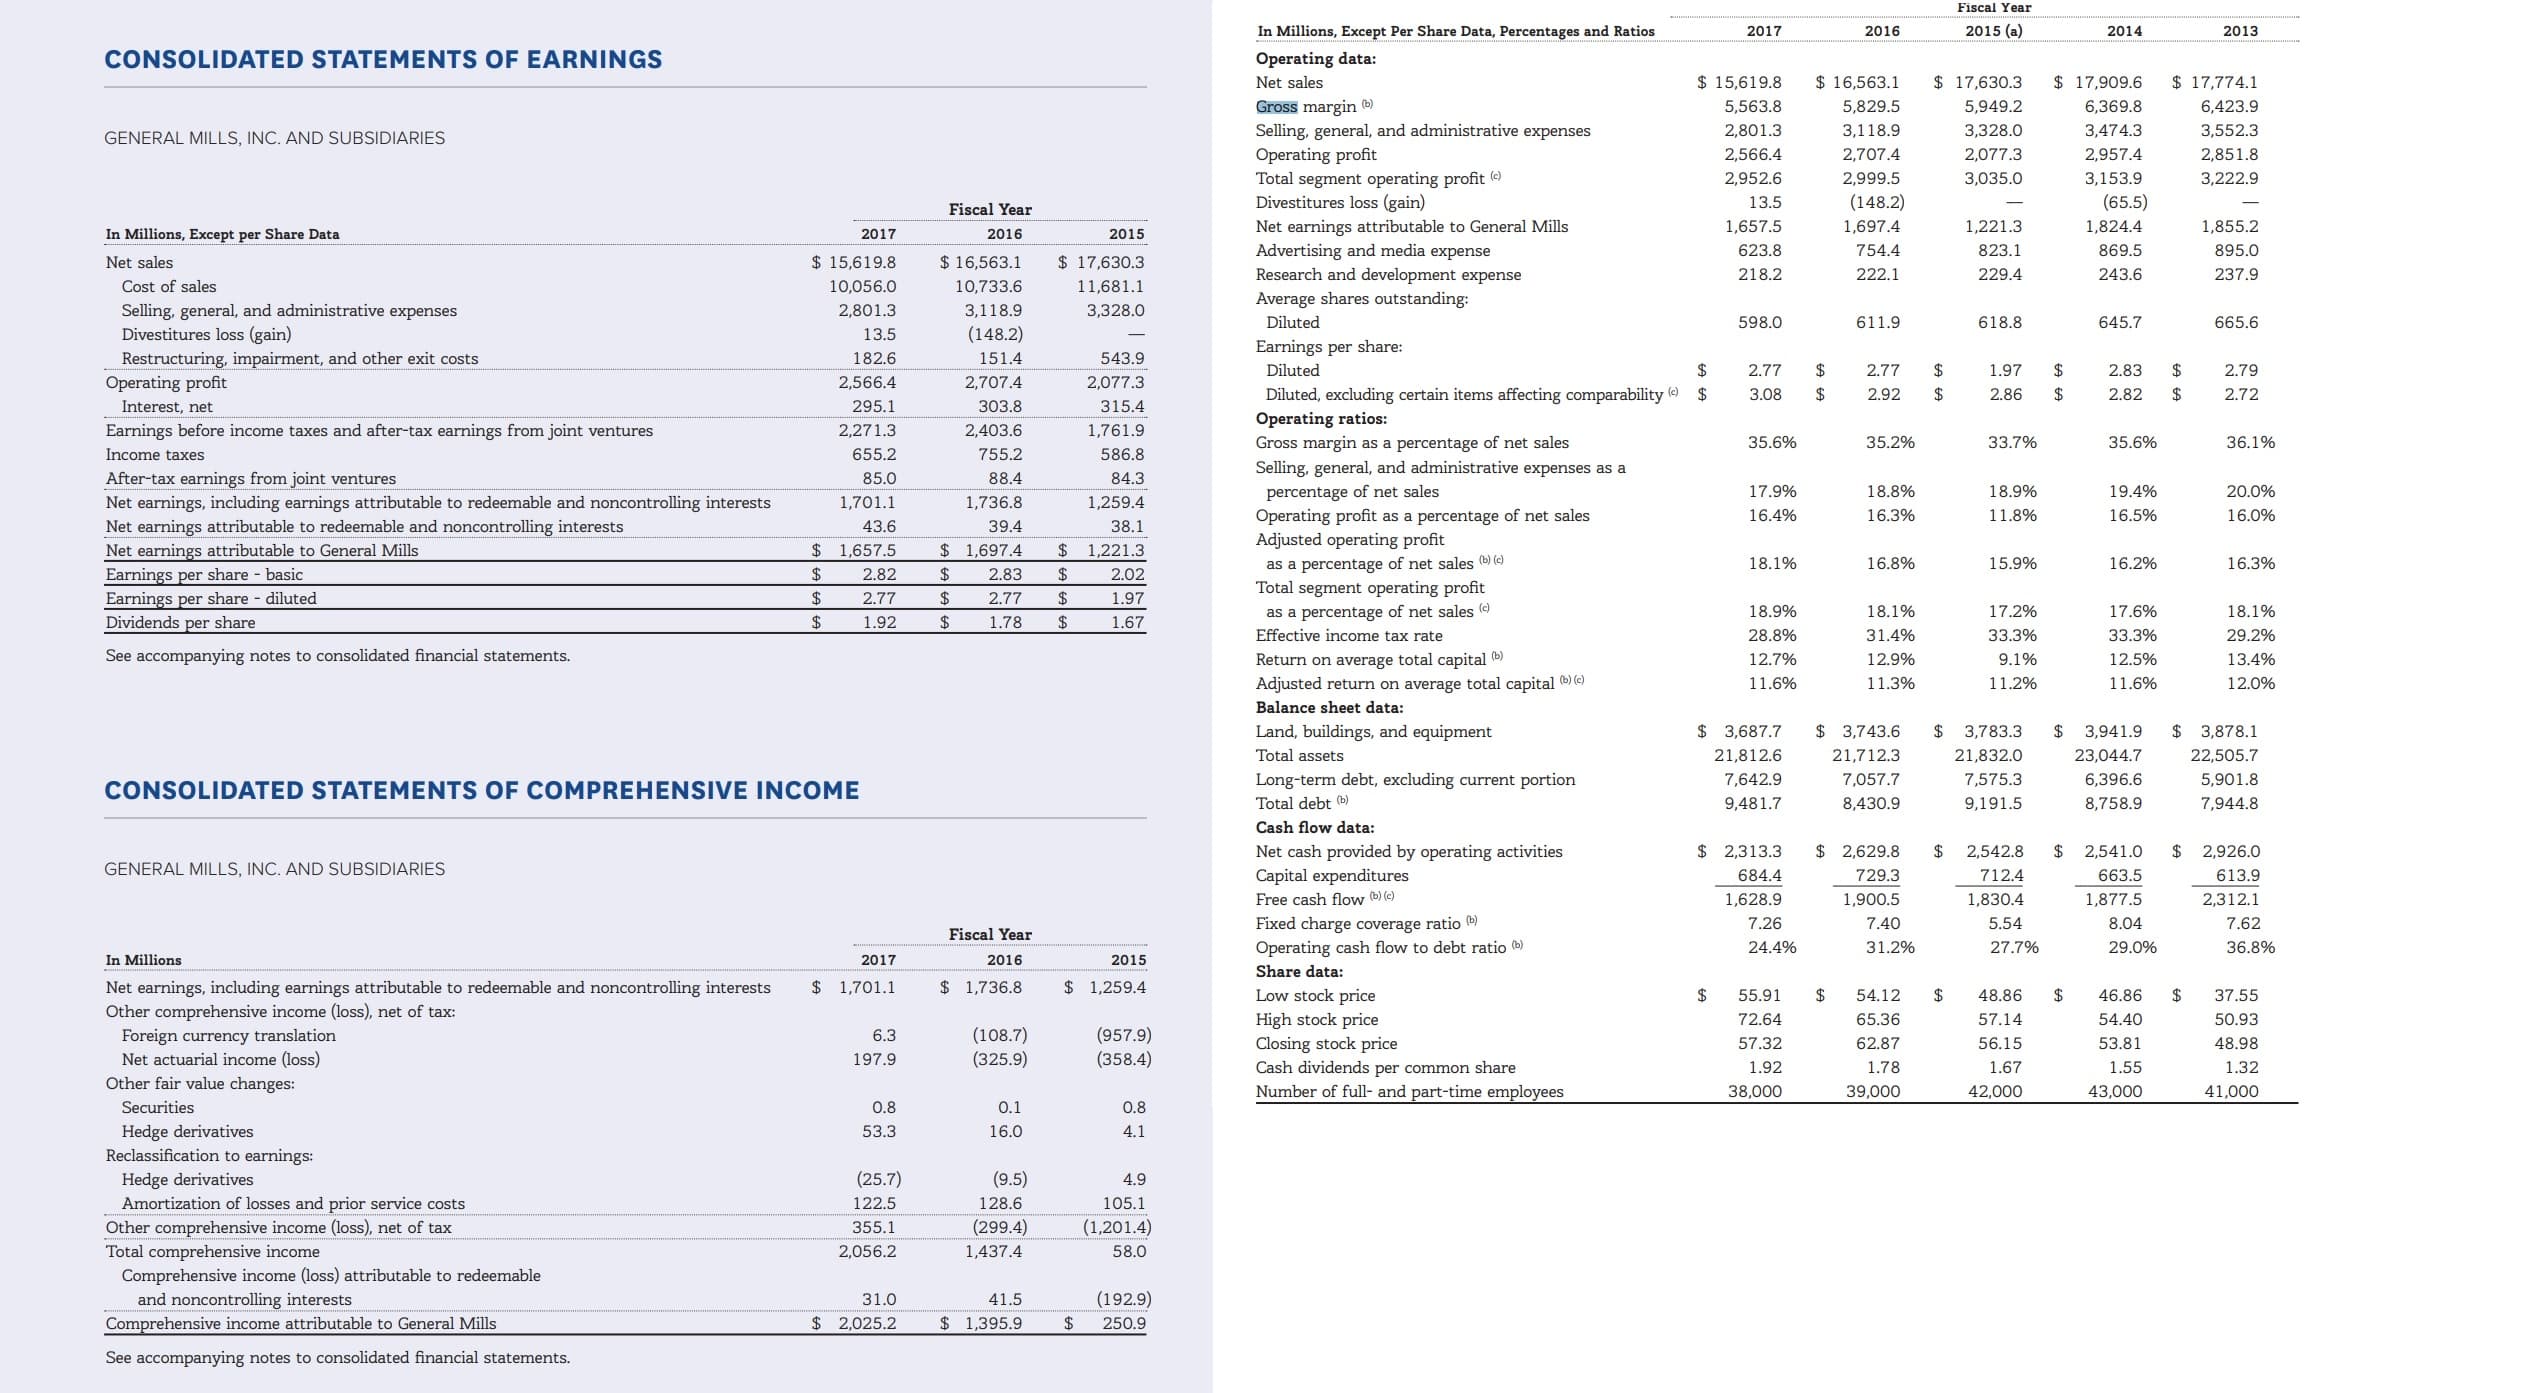 Fiscal Year
2015 (a)
In Millions, Except Per Share Data, Percentages and Ratios
2017
2016
2014
2013
CONSOLIDATED STATEMENTS OF EARNINGS
Operating data:
$ 17,630.3
$ 17,774.1
$15,619.8
$ 16,563.1
17,909.6
Net sales
Gross margin b)
Selling, general, and administrative expenses
Operating profit
Total segment operating profit (e
Divestitures loss (gain)
Net earnings attributable to General Mills
Advertising and media expense
Research and development expense
5,563.8
5,829.5
5,949.2
6,369.8
6,423.9
3,328.0
2,801.3
3,118.9
3,474.3
3,552.3
GENERAL MILLS, INC. AND SUBSIDIARIES
2,566.4
2,707.4
2,077.3
2,957.4
2,851.8
2,952.6
2,999.5
3,035.0
3,153.9
3,222.9
(148.2)
(65.5)
13.5
Fiscal Year
1,657.5
1,697.4
1,221.3
1,824.4
1,855.2
In Millions, Except per Share Data
2017
2016
2015
754.4
623.8
823.1
869.5
895.0
$ 17,630.3
Net sales
$ 15,619.8
$ 16,563.1
243.6
218.2
222.1
229.4
237.9
Cost of sales
10,056.0
10,733.6
11,681.1
Average shares outstanding:
Selling, general, and administrative expenses
Divestitures loss (gain)
Restructuring, impairment, and other exit costs
Operating profit
3,118.9
3,328.0
2,801.3
Diluted
598.0
611.9
618.8
645.7
665.6
(148.2)
13.5
Earnings per share:
182.6
151.4
543.9
$
$
Diluted
2.77
2.77
1.97
2.83
2.79
2,566.4
2,707.4
2,077.3
Diluted, excluding certain items affecting comparability $
Operating ratios:
Gross margin as a percentage of net sales
$
3.08
2.92
$
2.86
$
2.82
2.72
$
Interest, net
295.1
303.8
315.4
Earnings before income taxes and after-tax earnings from joint ventures
2,271.3
2,403.6
1,761.9
35.6%
33.7%
35.2%
35.6%
36.1%
655.2
586.8
Income taxes
755.2
Selling, general, and administrative expenses as a
After-tax earnings from joint ventures
Net earnings, including earnings attributable to redeemable and noncontrolling interests
Net earnings attributable to redeemable and noncontrolling interests
85.0
88.4
84.3
percentage of net sales
Operating profit as a percentage of net sales
Adjusted operating profit
19.4%
17.9%
18.8%
18.9%
20.0%
1,701.1
1,736.8
1,259.4
16.3%
11.8%
16.4%
16.5%
16.0%
43.6
39.4
38.1
$ 1,697.4
$ 1,657.5
Net earnings attribut able to General Mills
1,221.3
as a percentage of net sales (b) (c)
Total segment operating profit
18.1%
16.8%
15.9%
16.2%
16.3%
Earnings per share basic
Earnings per share diluted
Dividends per share
$
2.82
2.83
2.02
$
2.77
2.77
1.97
$
as a percentage of net sales
Effective income tax rate
18.9%
18.1%
17.2%
17.6%
18.1%
$
1.92
1.78
1.67
$
$
28.8%
31.4%
33.3%
33.3%
29.2%
See accompanying notes to consolidated financial statements.
Return on average total capital
12.7%
12.9%
9.1%
12.5%
13.4%
Adjusted return on average total capital b)e)
11.6%
11.3%
11.2%
11.6%
12.0%
Balance sheet data:
$ 3,687.7
Land, buildings, and equipment
Total assets
$3,743.6
$
3,941.9
3,878.1
3,783.3
21,812.6
23,044.7
21,712.3
21,832.0
22,505.7
6,396.6
Long-term debt, excluding current portion
7,642.9
7,057.7
7,575.3
5,901.8
CONSOLIDATED STATEMENTS OF COMPREHENSIVE INCOME
Total debt (b)
9,481.7
8,430.9
9,191.5
8,758.9
7,944.8
Cash flow data:
$ 2,313.3
$
2,542.8
712.4
$
2,926.0
613.9
$ 2,629.8
$ 2,541.0
Net cash provided by operating activities
Capital expenditures
Free cash flow (b) (e)
GENERAL MILLS, INC. AND SUBSIDIARIES
729.3
684.4
663.5
1,628.9
1,900.5
1,830.4
1,877.5
2,312.1
Fixed charge coverage ratio ()
Operating cash flow to debt ratio (b)
7.26
7.40
5.54
8.04
7.62
Fiscal Year
24.4%
31.2%
27.7%
29.0%
36.8%
2016
In Millions
2017
2015
Share data:
$ 1,701.1
$ 1,259.4
1,736.8
Net earnings, including earnings attributable to redeemable and noncontrolling interests
Other comprehensive income (loss), net of tax:
Foreign currency translation
Net actuarial income (loss)
Low stock price
$
$
55.91
54.12
48.86
46.86
37.55
High stock price
Closing stock price
72.64
65.36
57.14
54.40
50.93
(957.9)
(358.4)
(108.7)
(325.9)
6.3
57.32
62.87
56.15
53.81
48.98
197.9
Cash dividends per common share
1.92
1.78
1.67
1.55
1.32
Other fair value changes:
Number of full- and part-time employees
38,000
39,000
42,000
43,000
41,000
Securities
0.8
0.1
0.8
Hedge derivatives
Reclassification to earnings:
Hedge derivatives
53.3
16.0
4.1
(25.7)
(9.5)
4.9
Amortization of losses and prior service costs
Other comprehensive income (loss), net of tax
Total comprehensive income
Comprehensive income (loss) attributable to redeemable
122.5
128.6
105.1
(299.4)
(1,201.4)
355.1
2,056.2
1,437.4
58.0
(192.9)
and noncontrolling interests
Comprehensive income attributable to General Mills
31.0
41.5
$ 2,025.2
1,395.9
250.9
See accompanying notes to consolidated financial statements.
